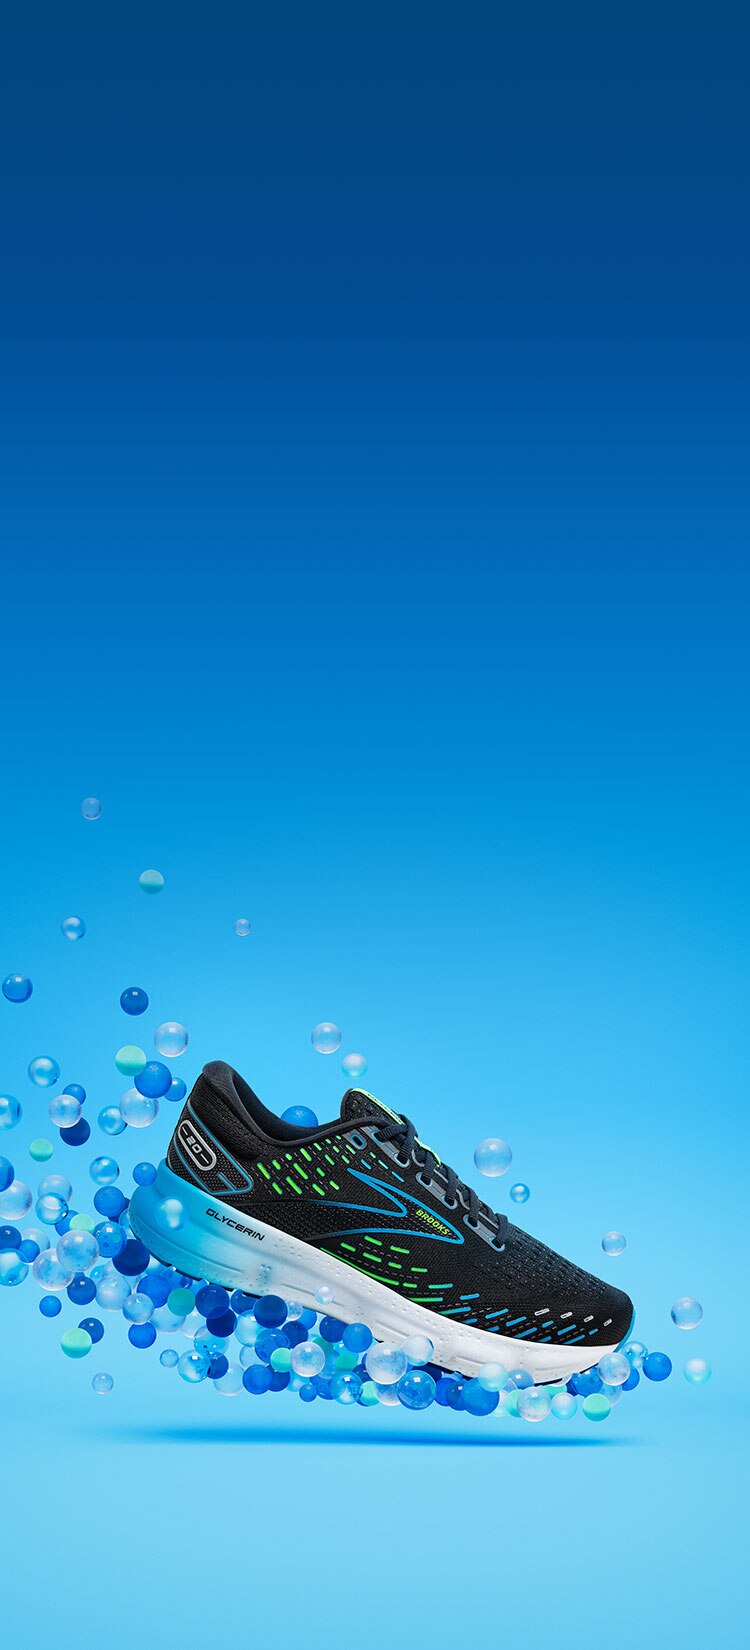 Find your run with the Glycerin 20